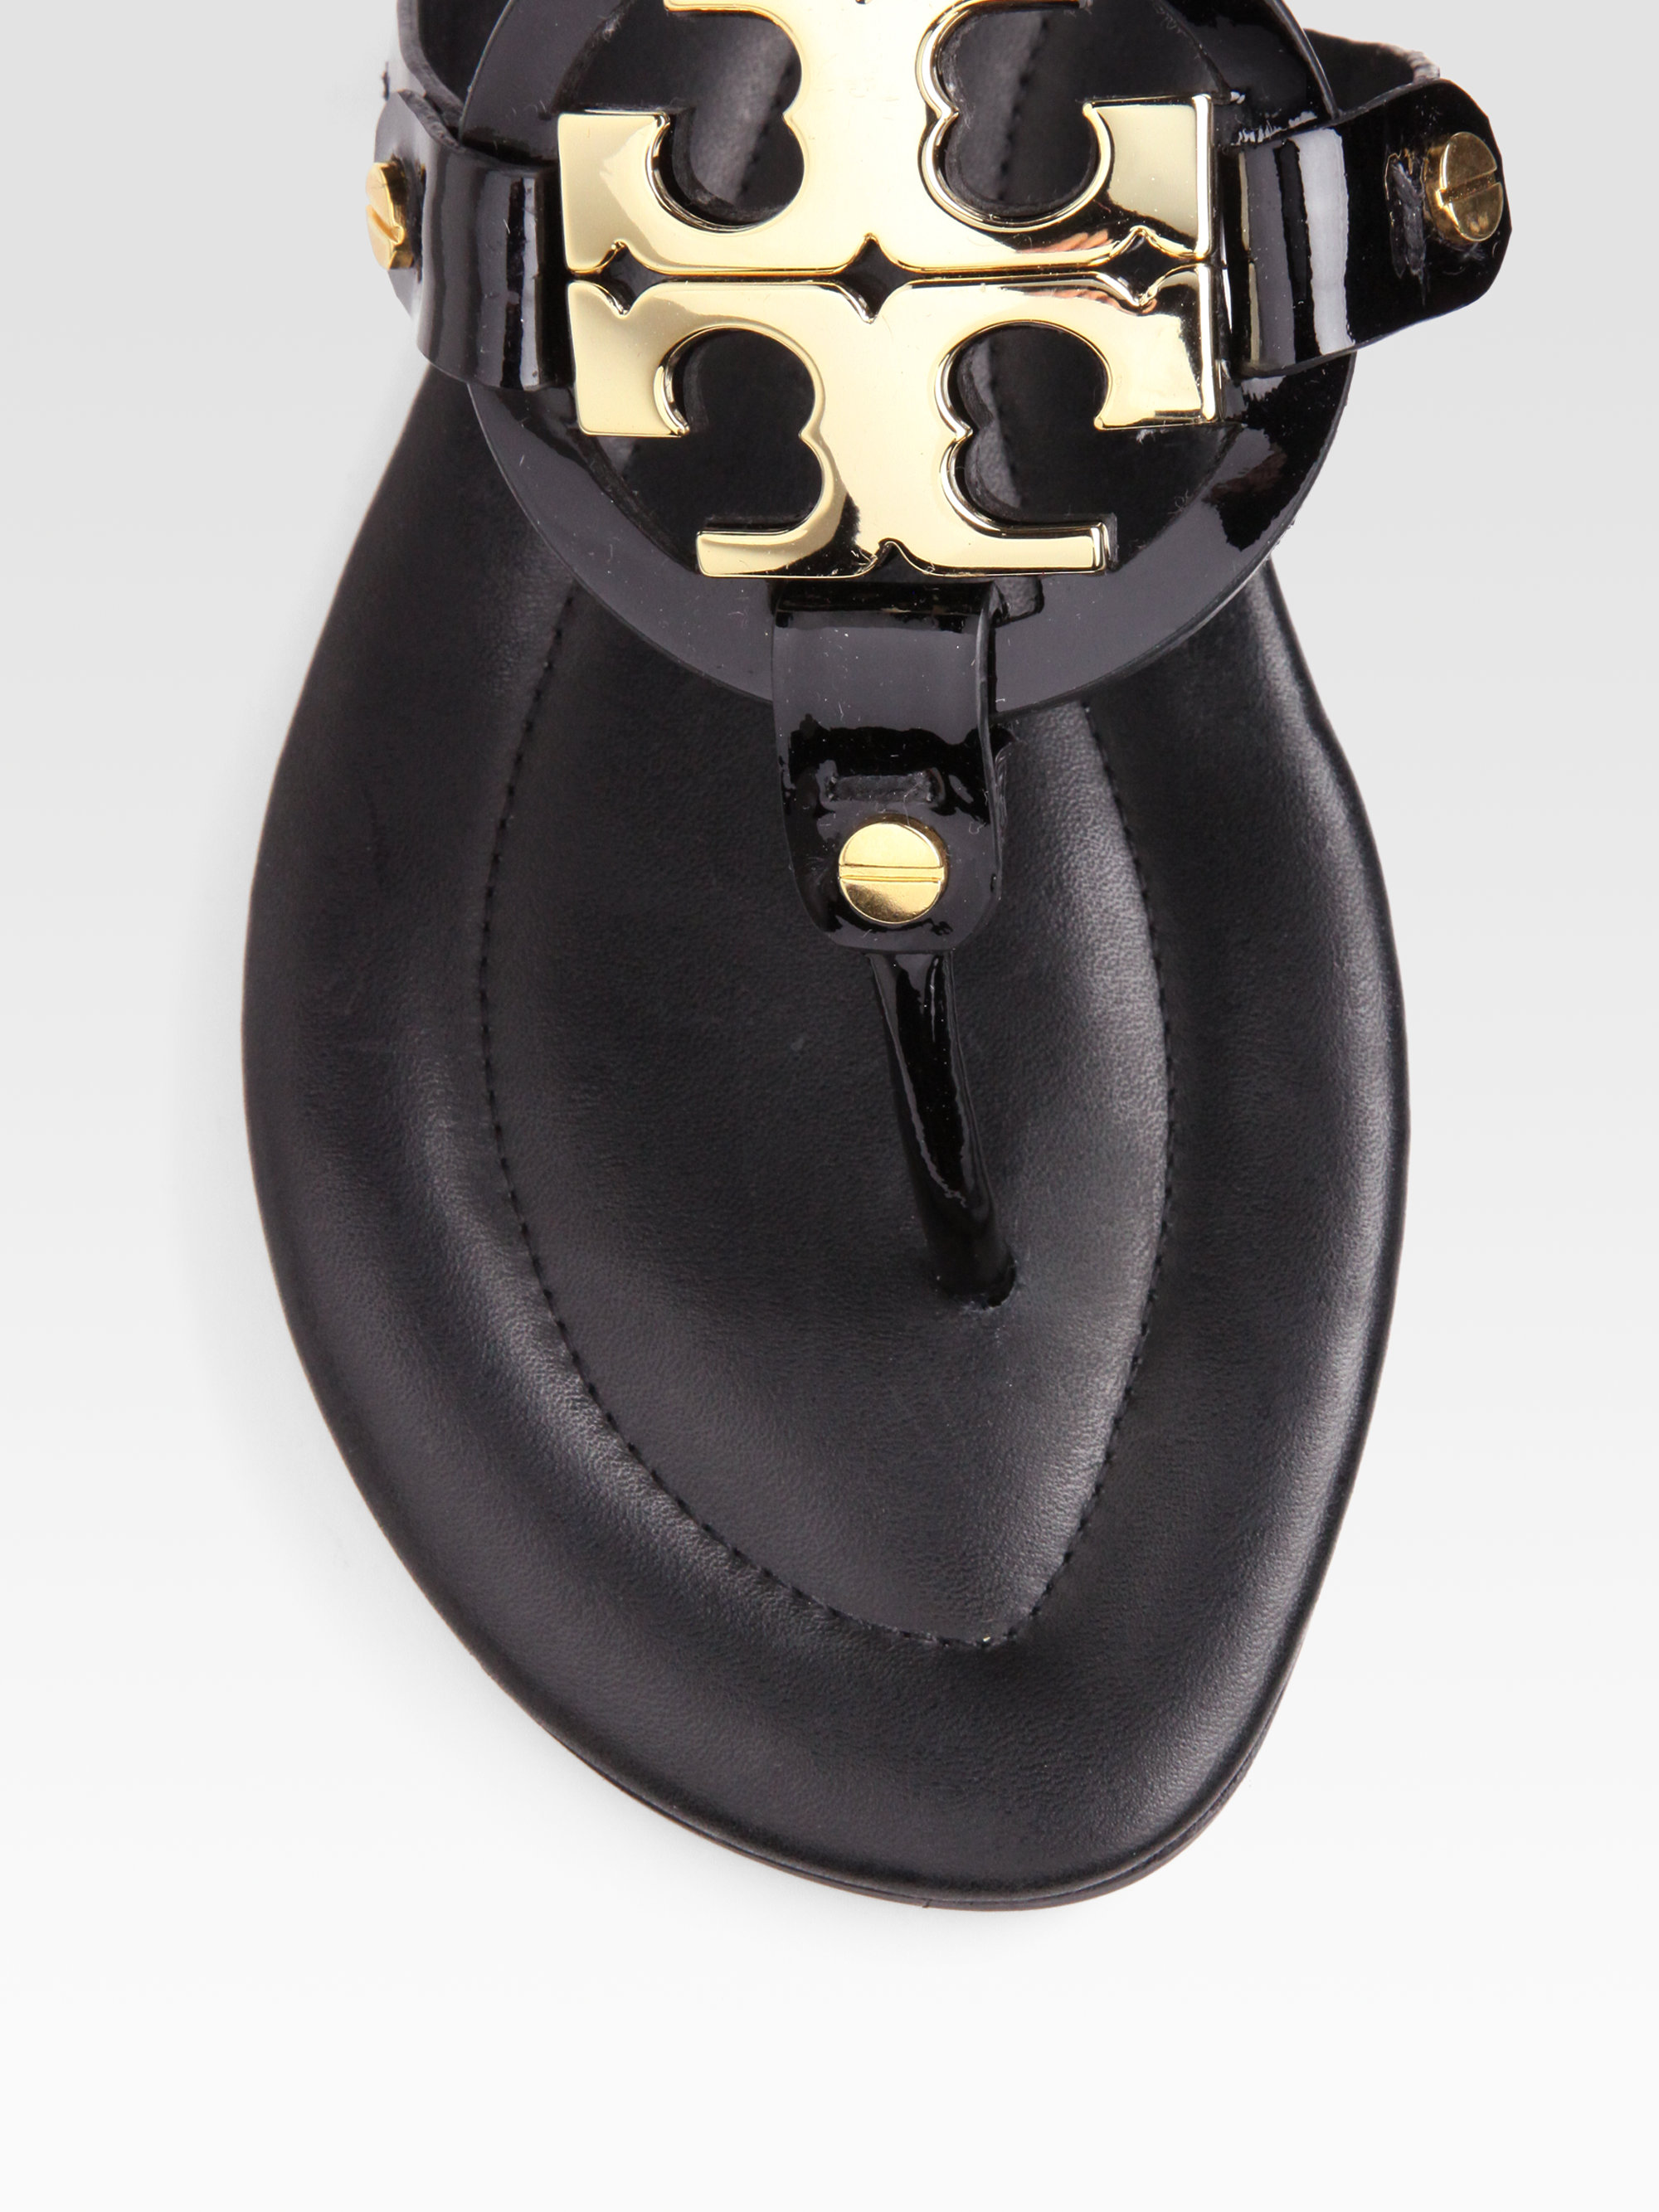 black and gold tory burch sandals